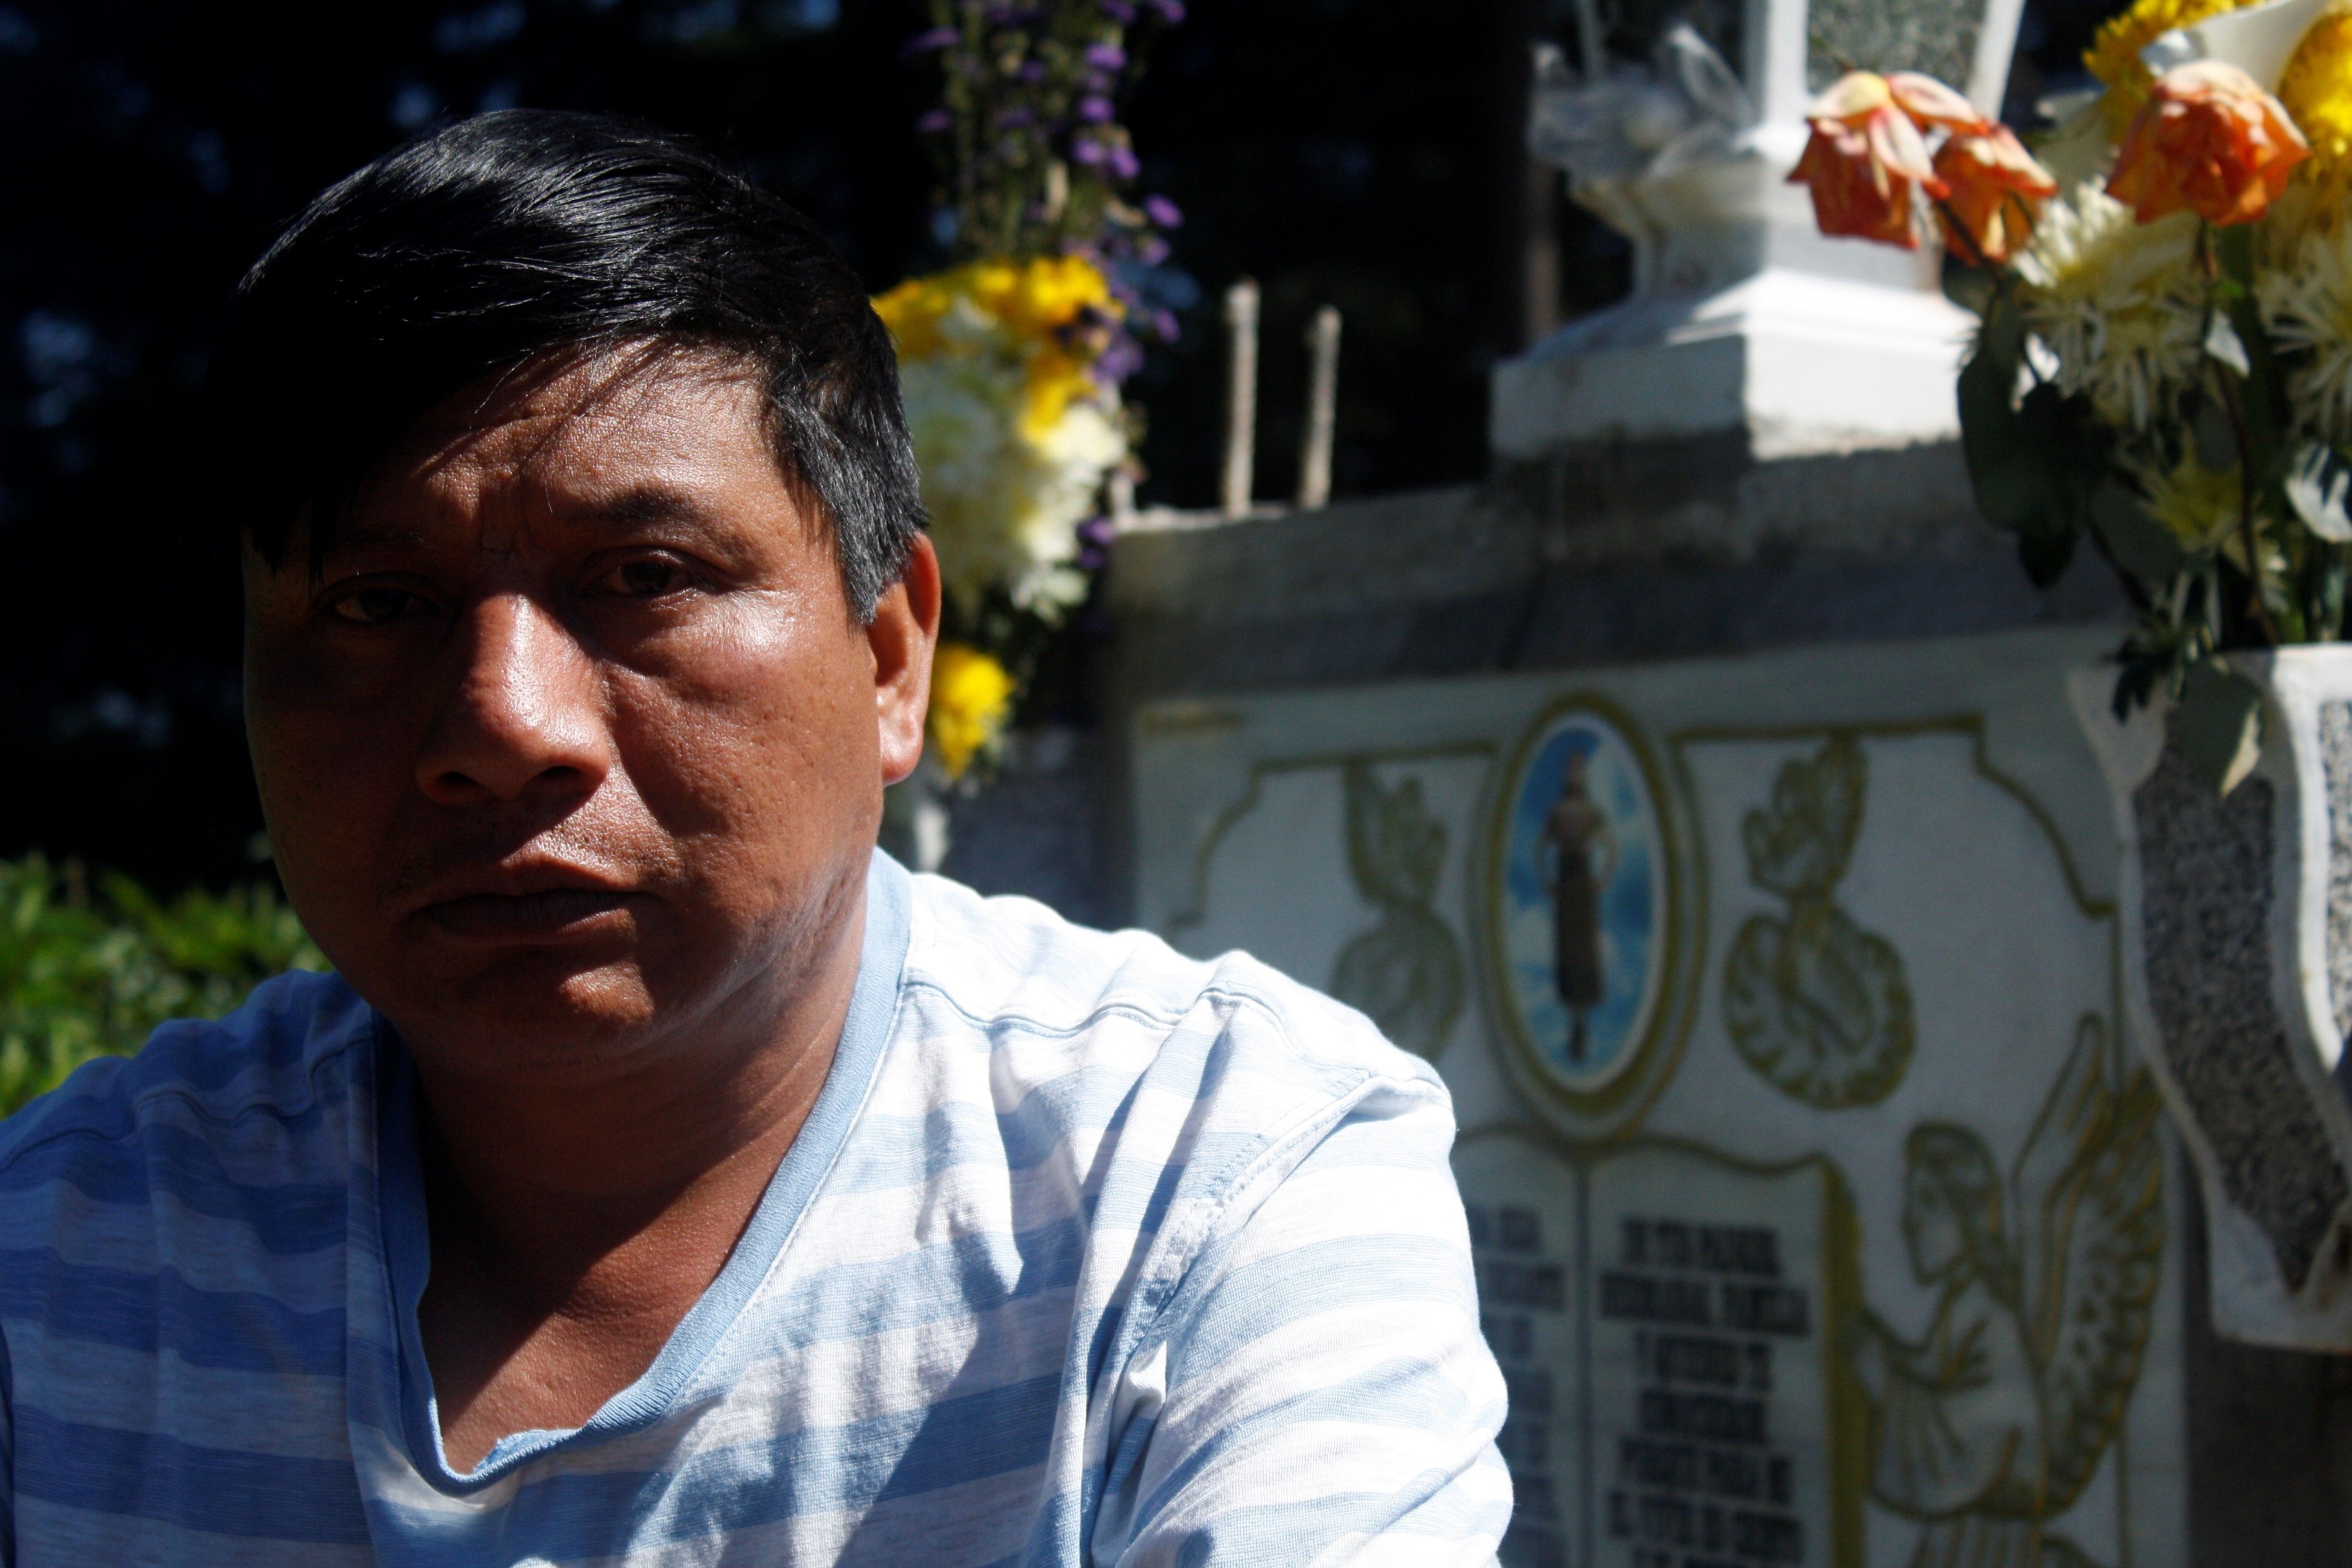 Gilberto Gonzalez visits his daughter’s grave every day. Claudia Gomez-Gonzales, 21, was shot in the head by a U.S. Border Patrol agent in May 2018 near Rio Grande, Texas. Authorities say she crossed into the country illegally and was trying to evade arrest; witnesses say she was hiding in a bush. Her body was repatriated in June and is buried at the edge of a cliff in her hometown of San Juan-Ostuncalco. Image by Kristian Hernandez. Guatemala, 2018.